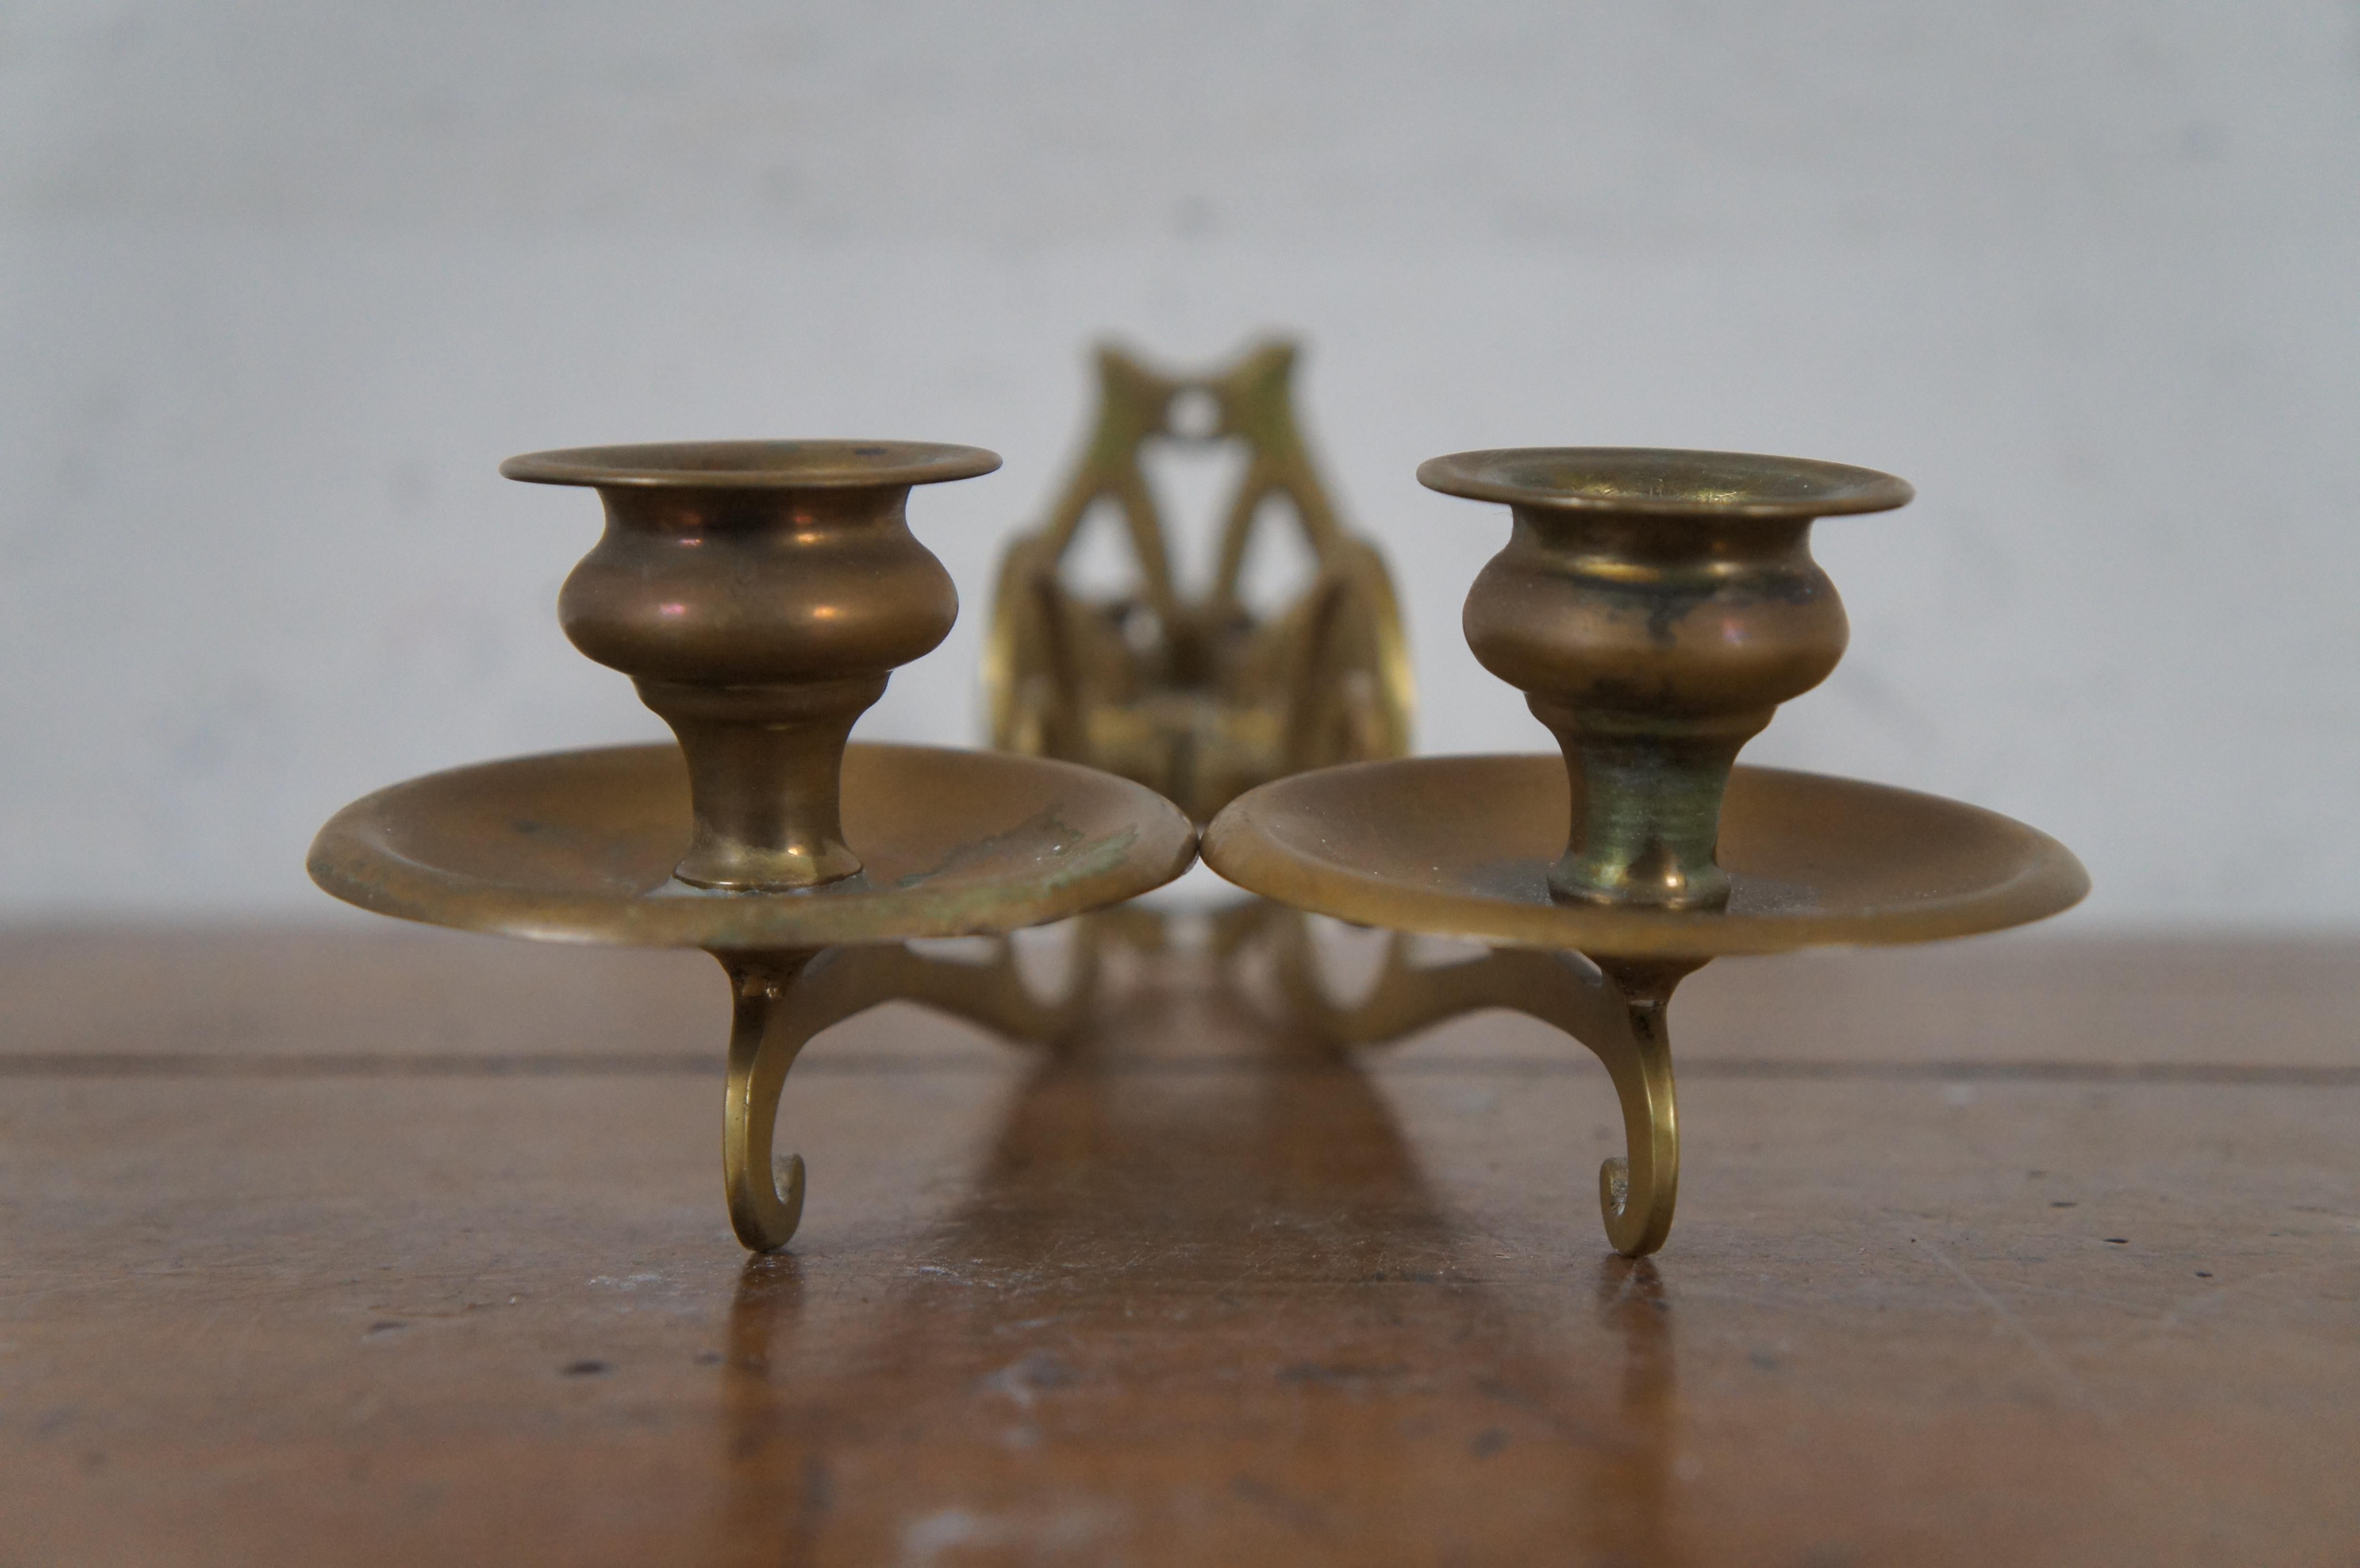 19th Century Antique Victorian Brass Piano Swing Arm Candelabra Candle Holder Sconce 15